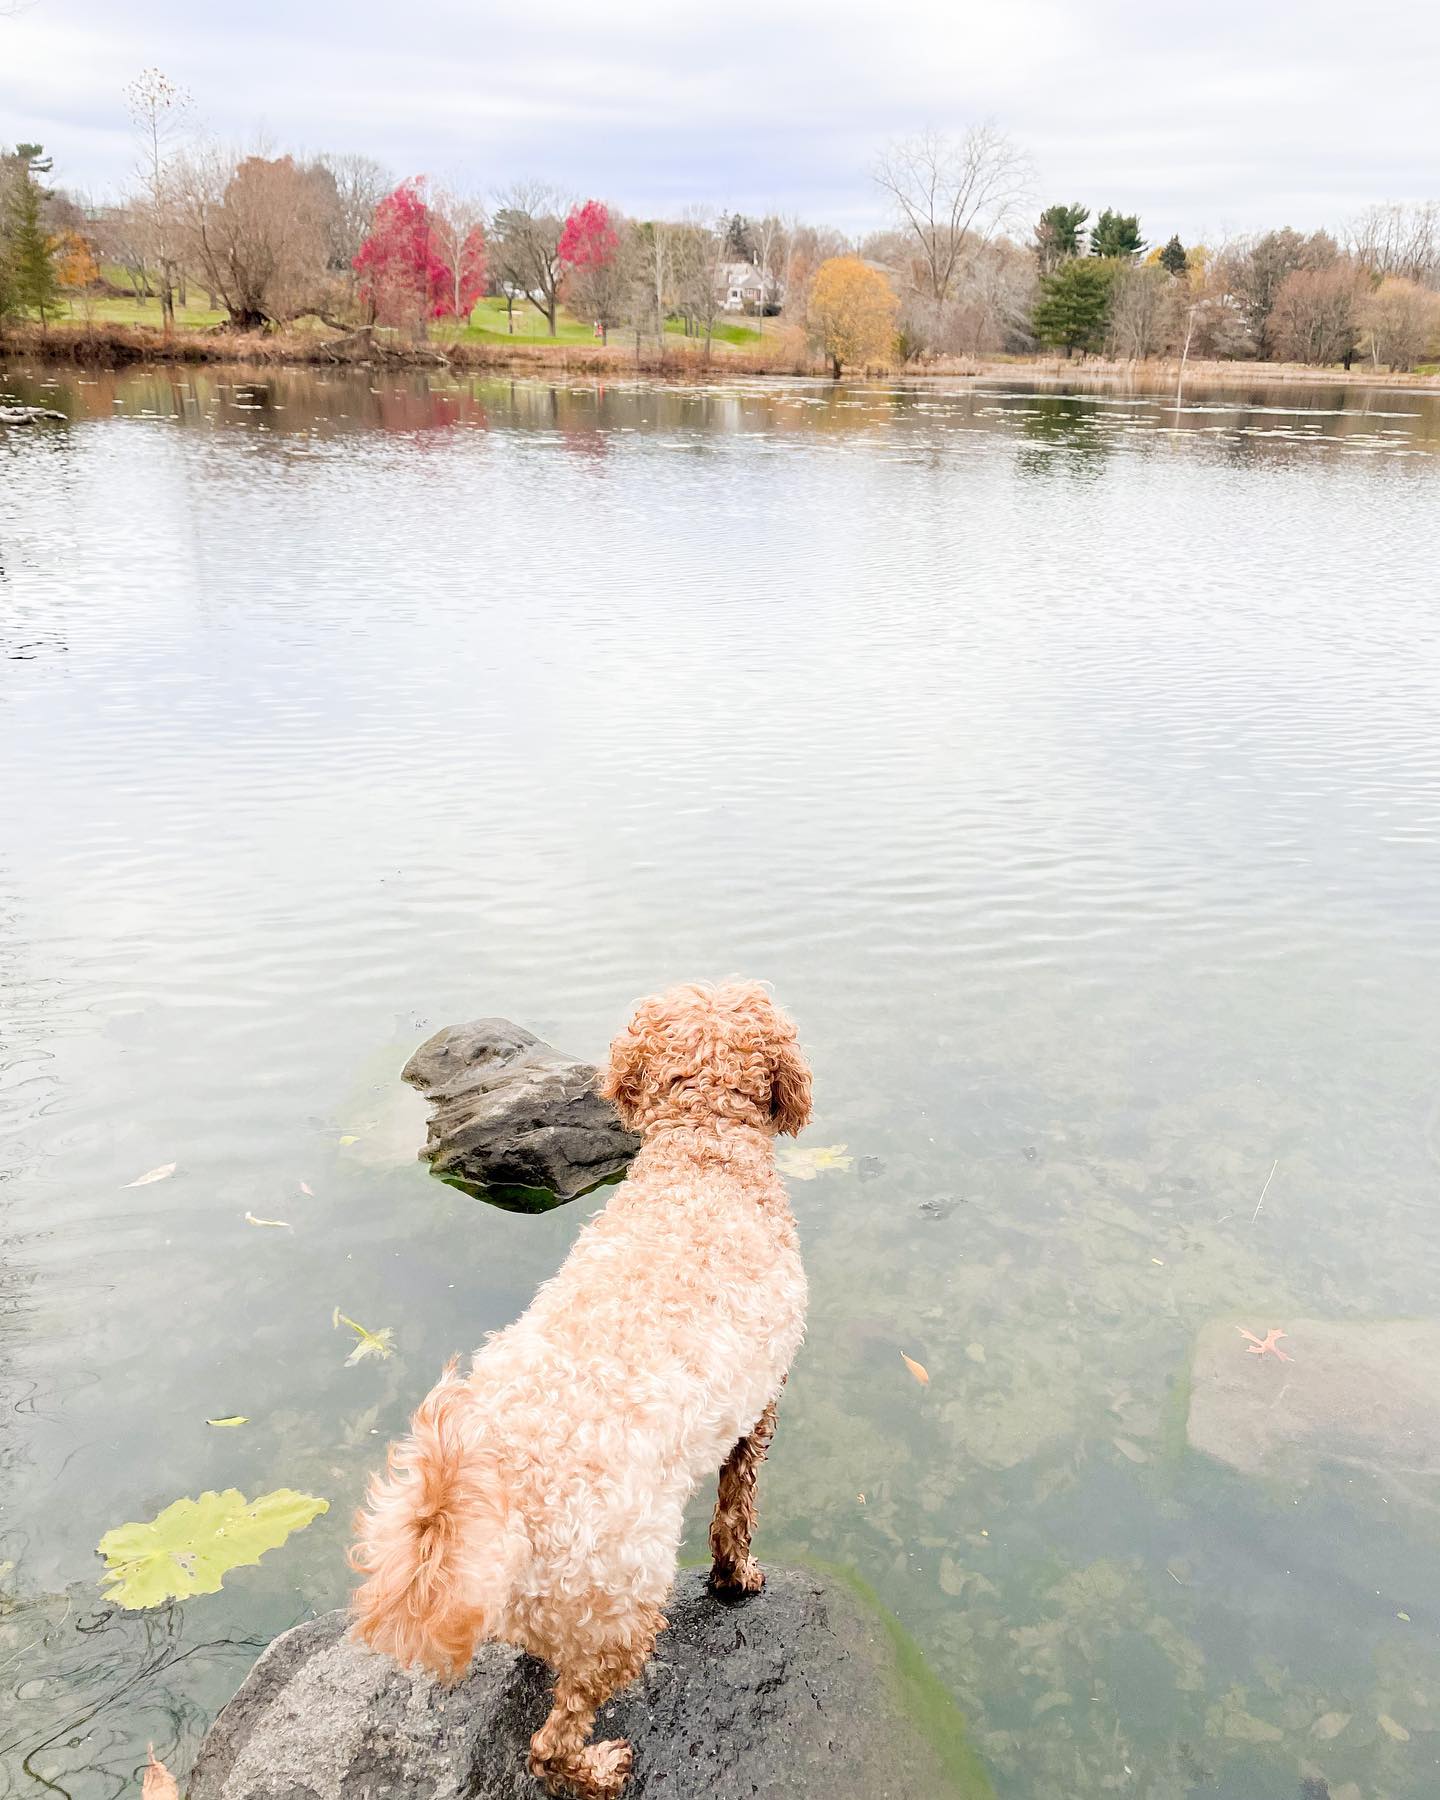 This pond, she be fresh. 🐾